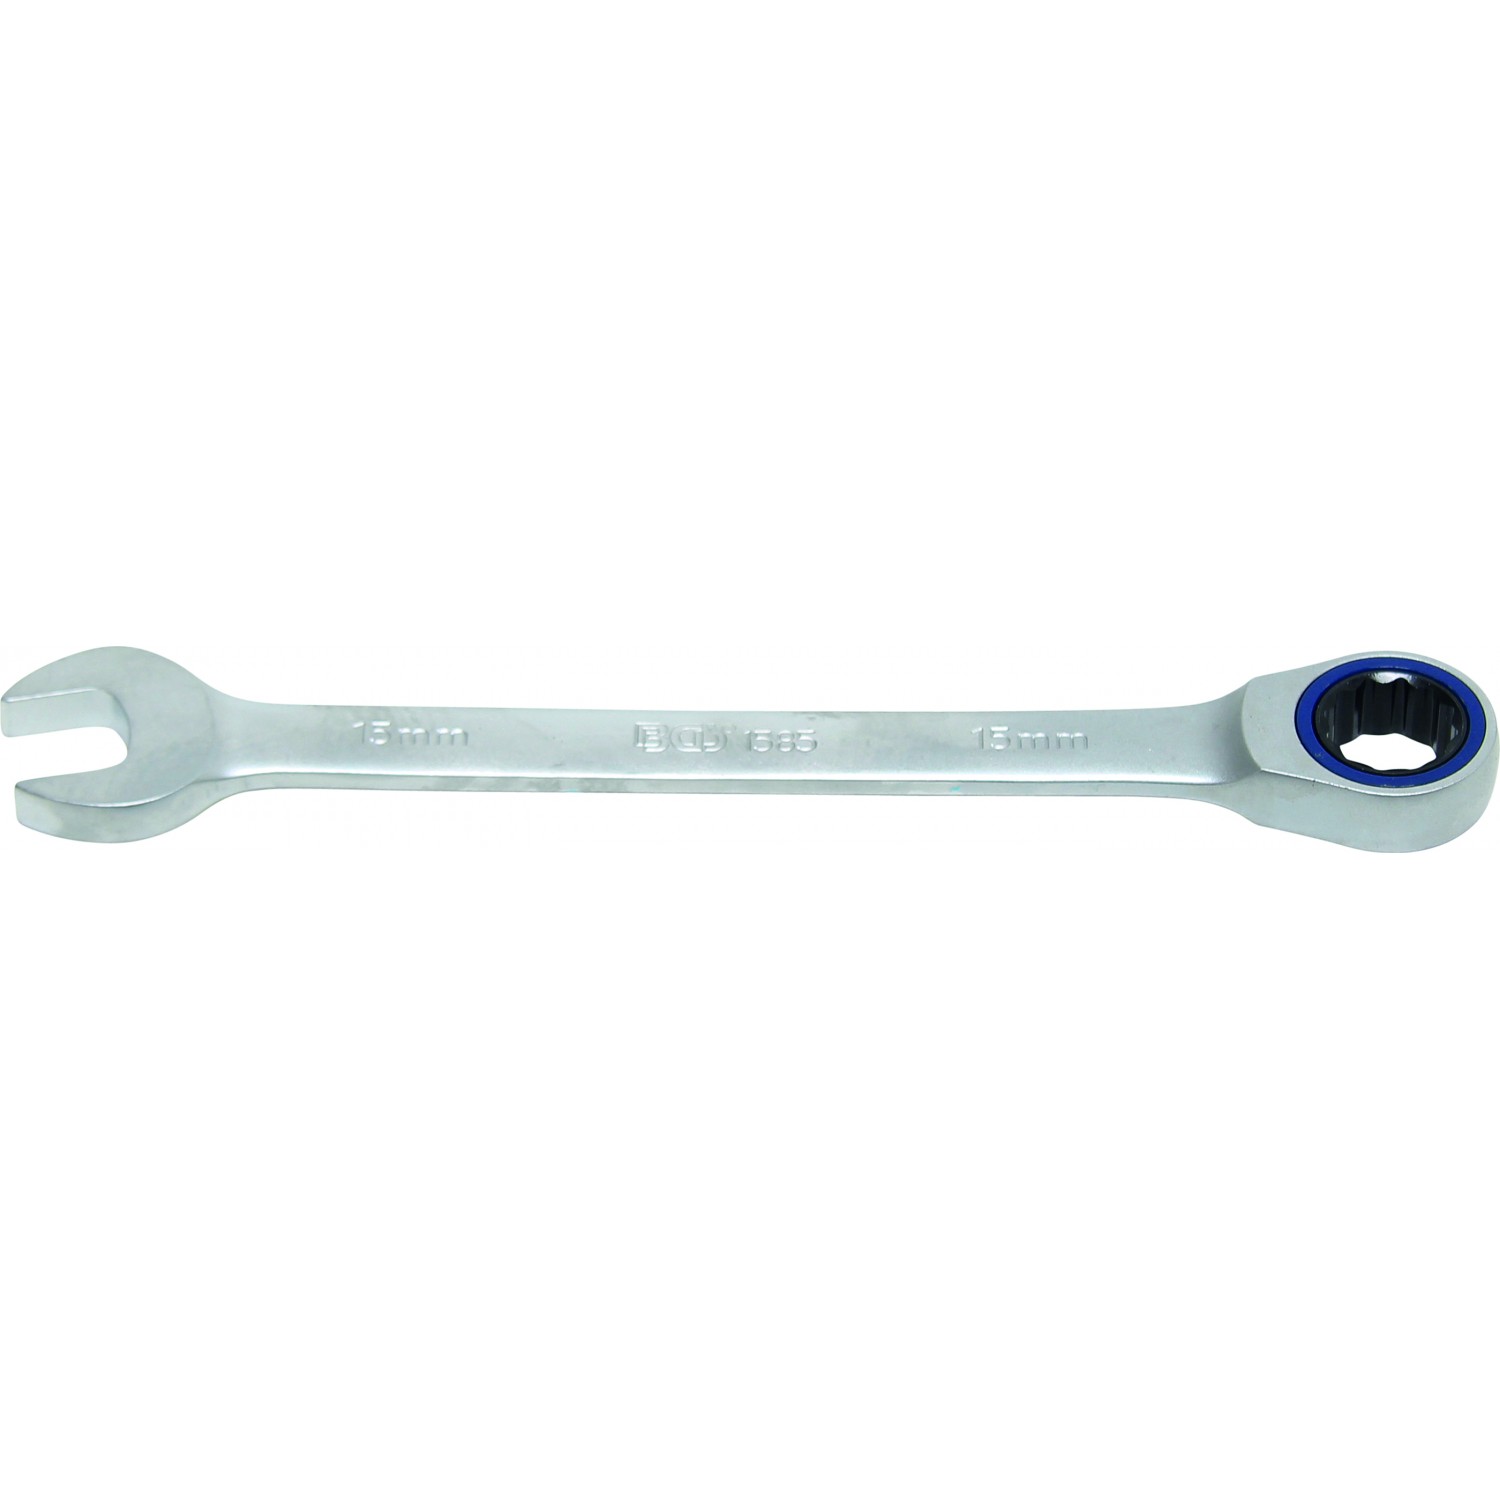 Ratchet Wrench | 15 mm (1585)